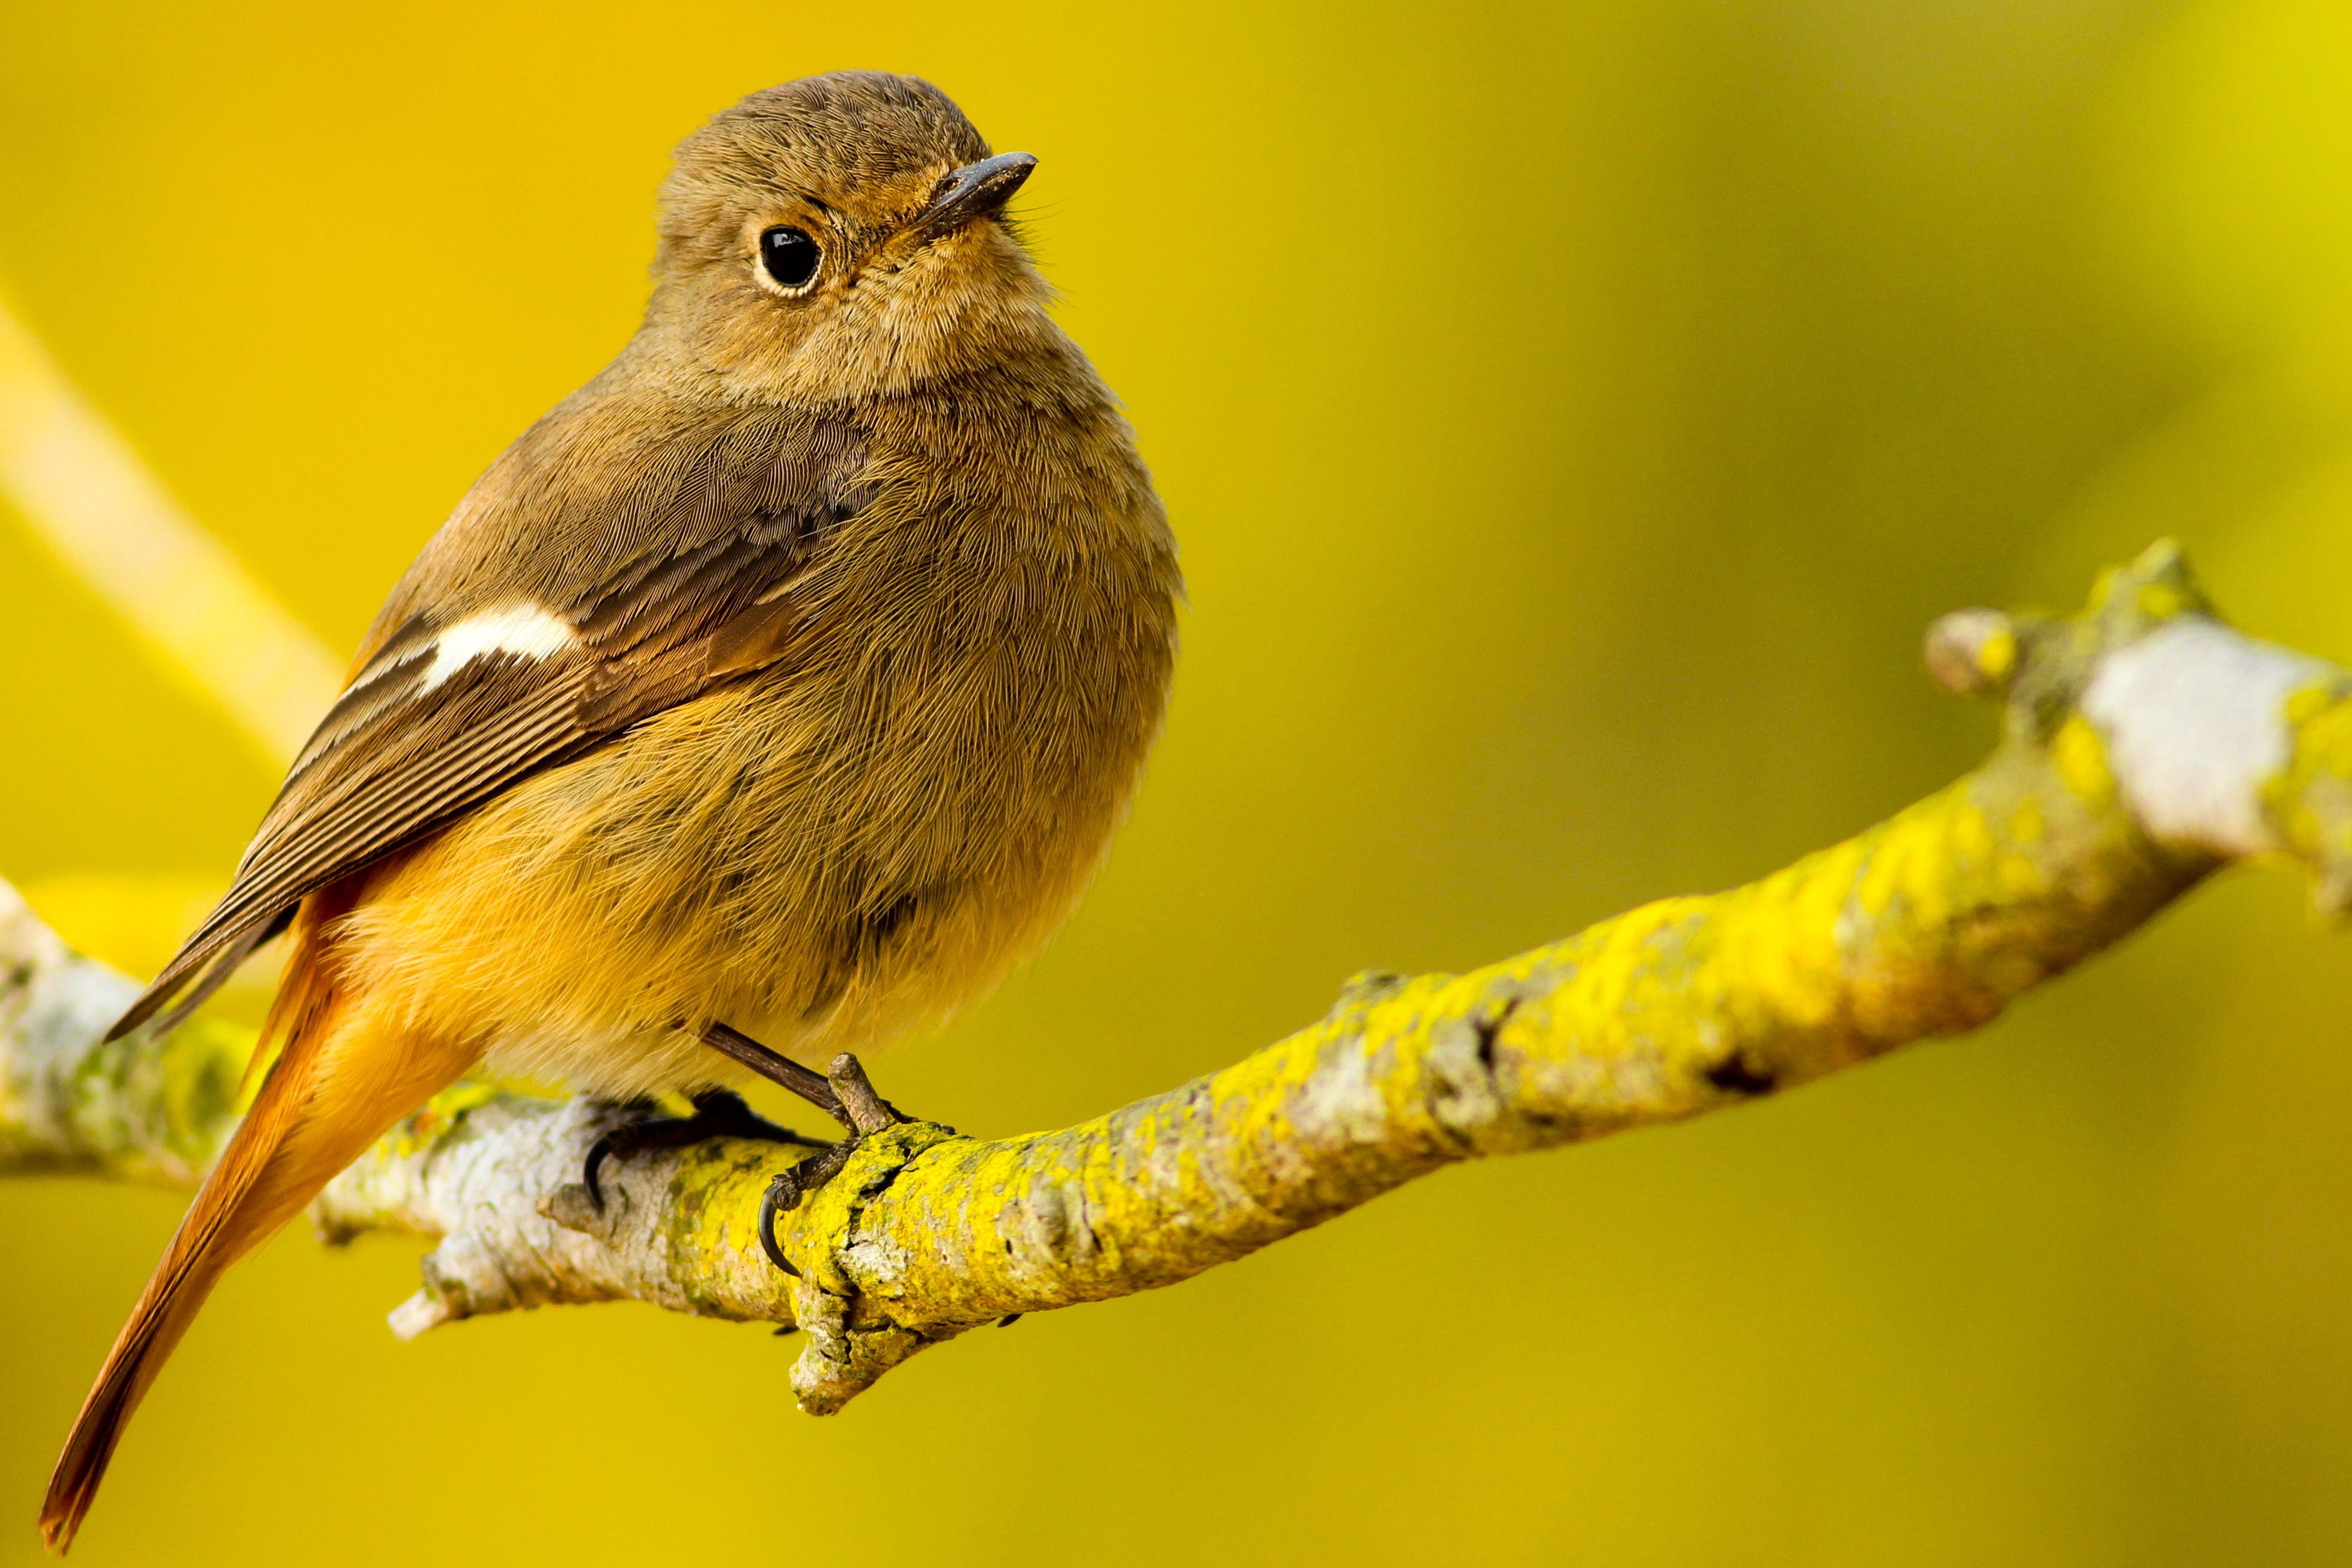 close up birdwatching detailed view of small brown bird perched on tree branch, yellow toned photograph